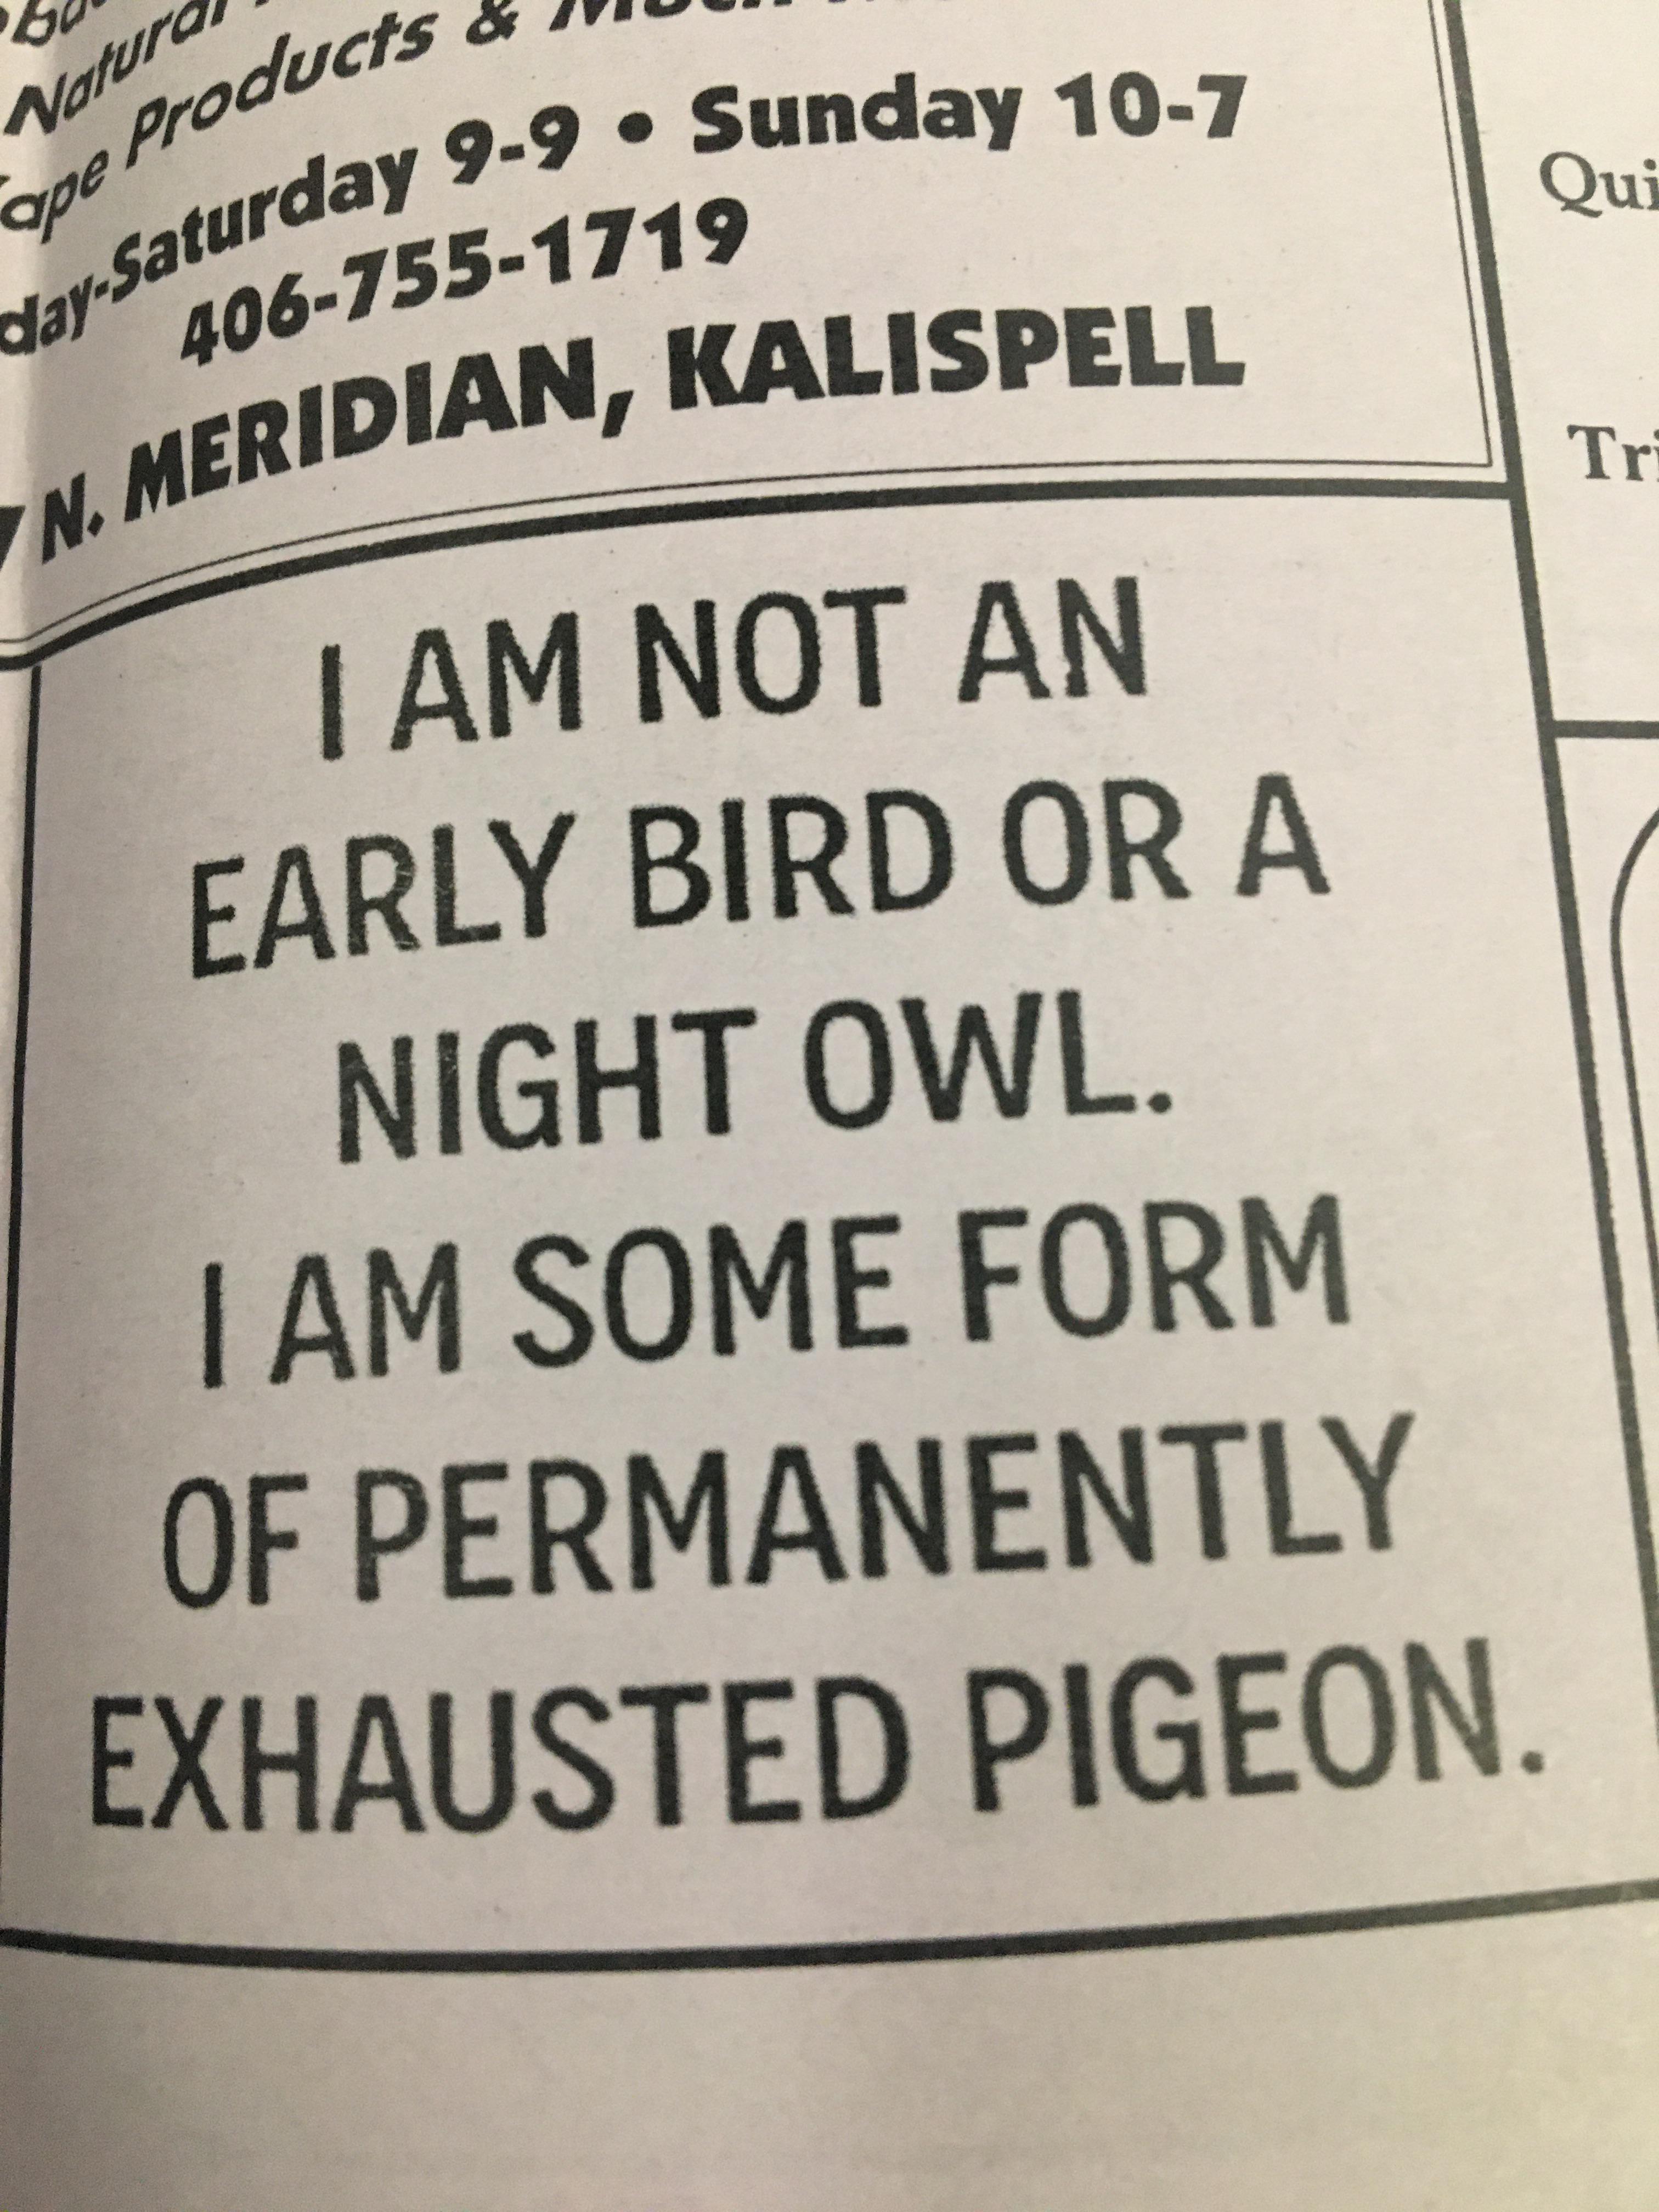  A proper pigeon would not have bothered to take out a classified ad.